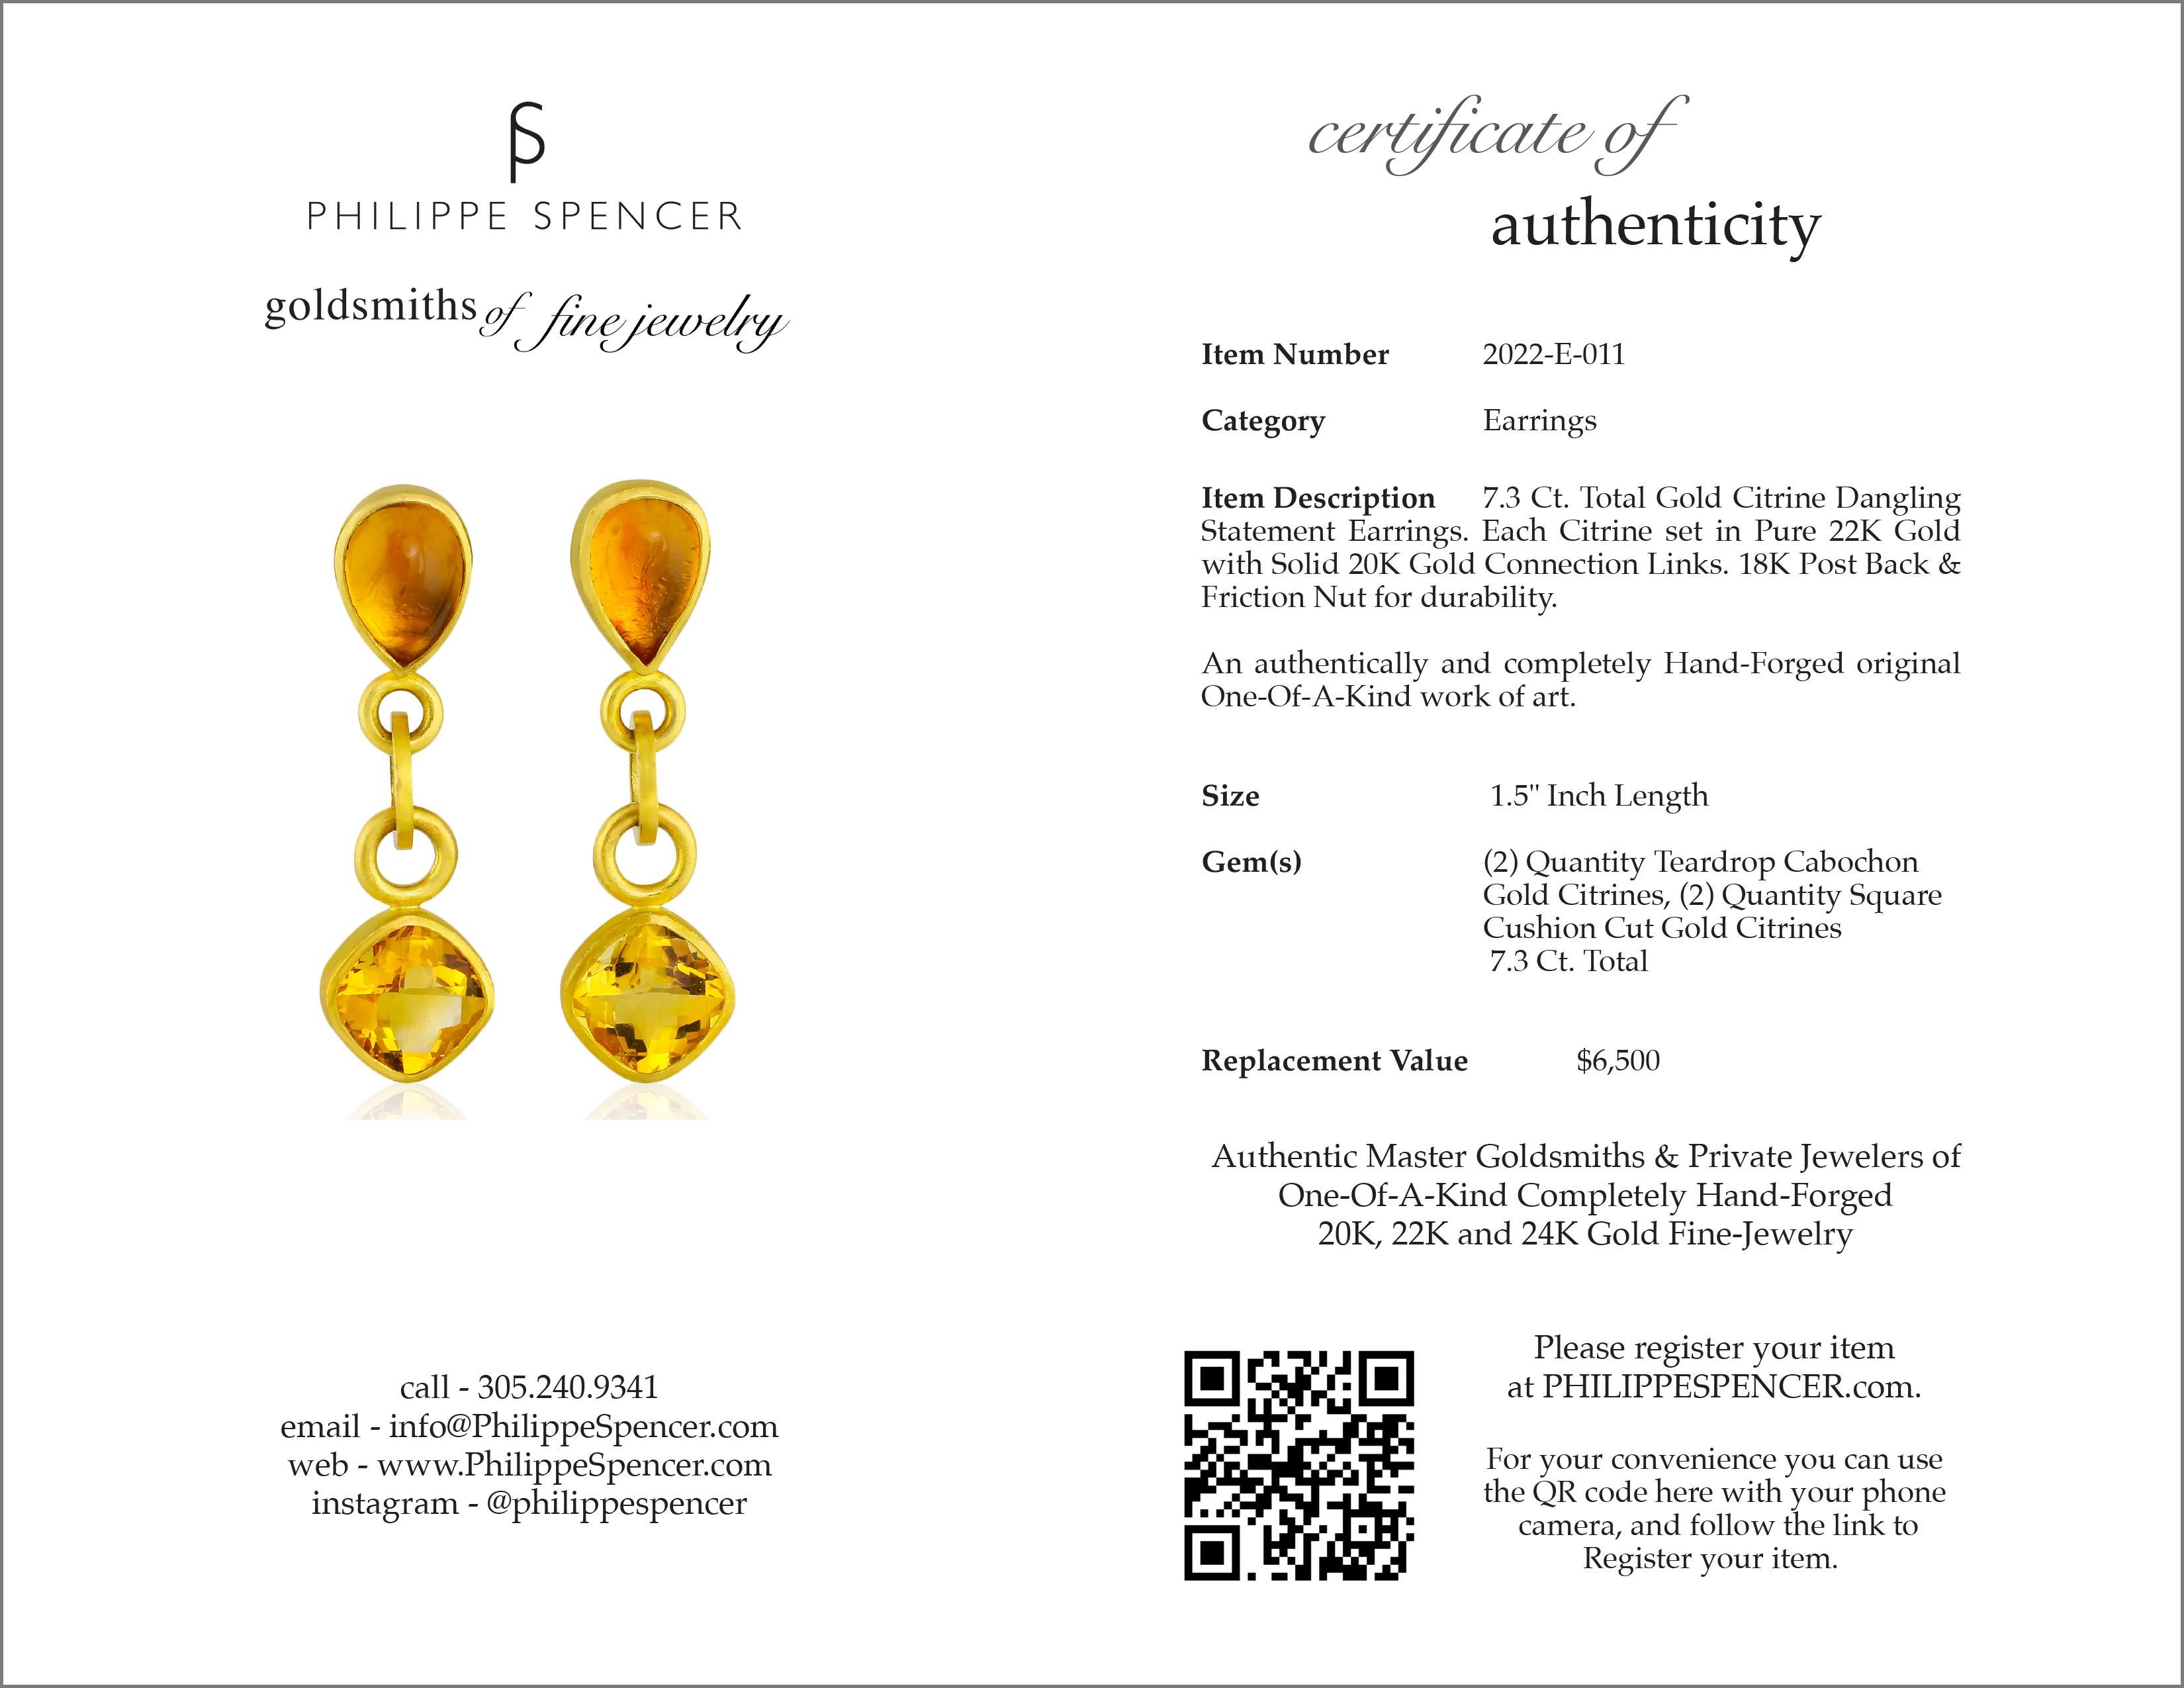 Cabochon PHILIPPE SPENCER 7.3 Ct. Gold Citrines in 22K & 20K Gold Dangling Earrings For Sale